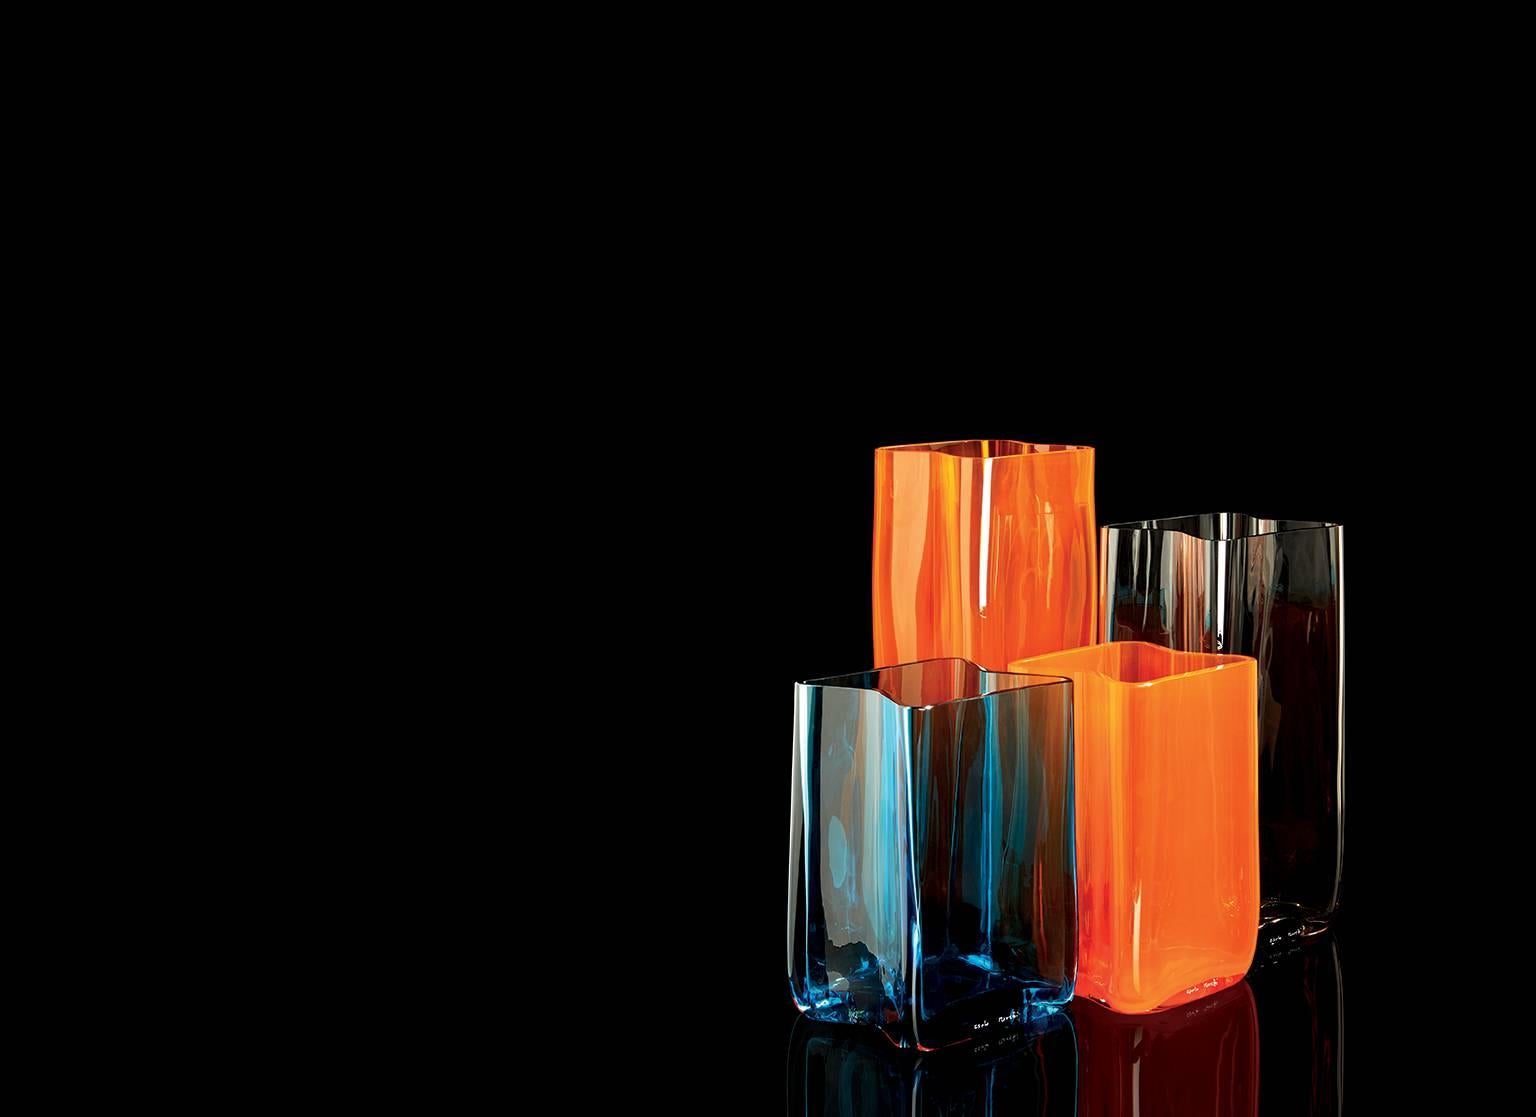 Carlo Moretti Bosco contemporary mouth blown Murano glass vase in orange.

Bosco can be combined with other Bosco vases, sizes and colors, harmoniously.













































 